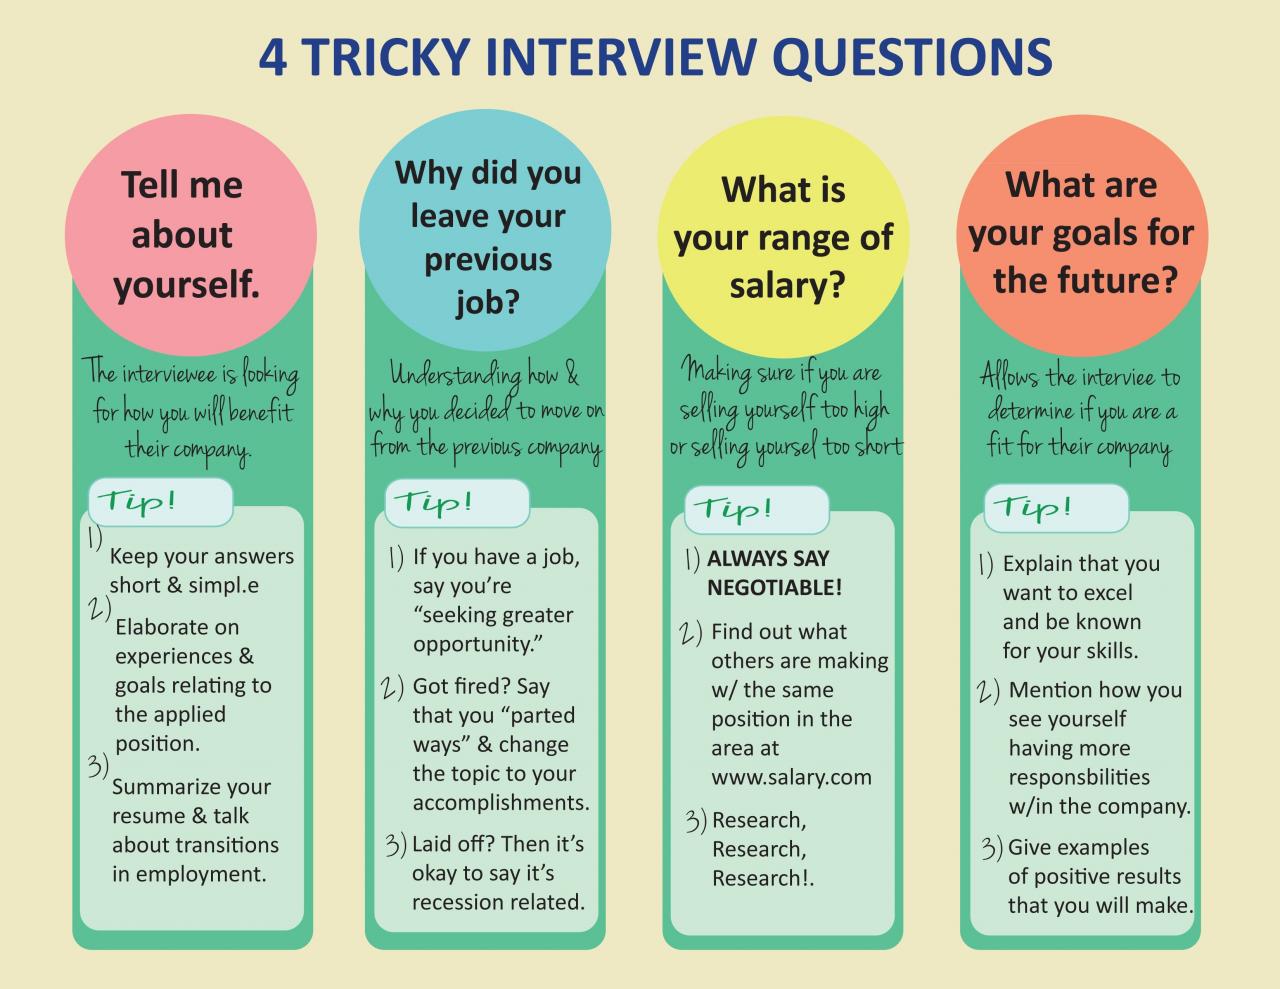 5 questions asked during an interview